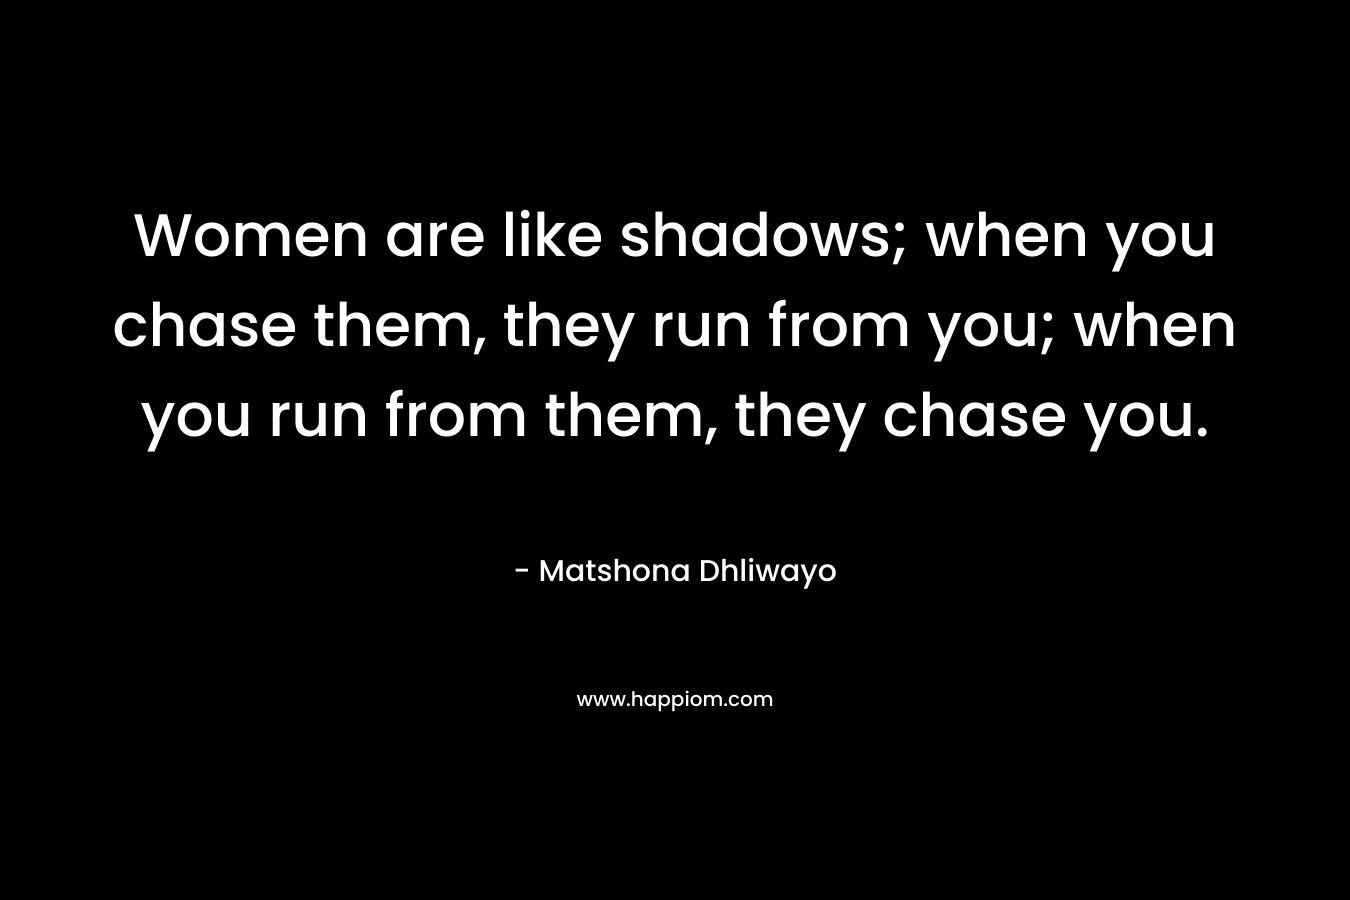 Women are like shadows; when you chase them, they run from you; when you run from them, they chase you.